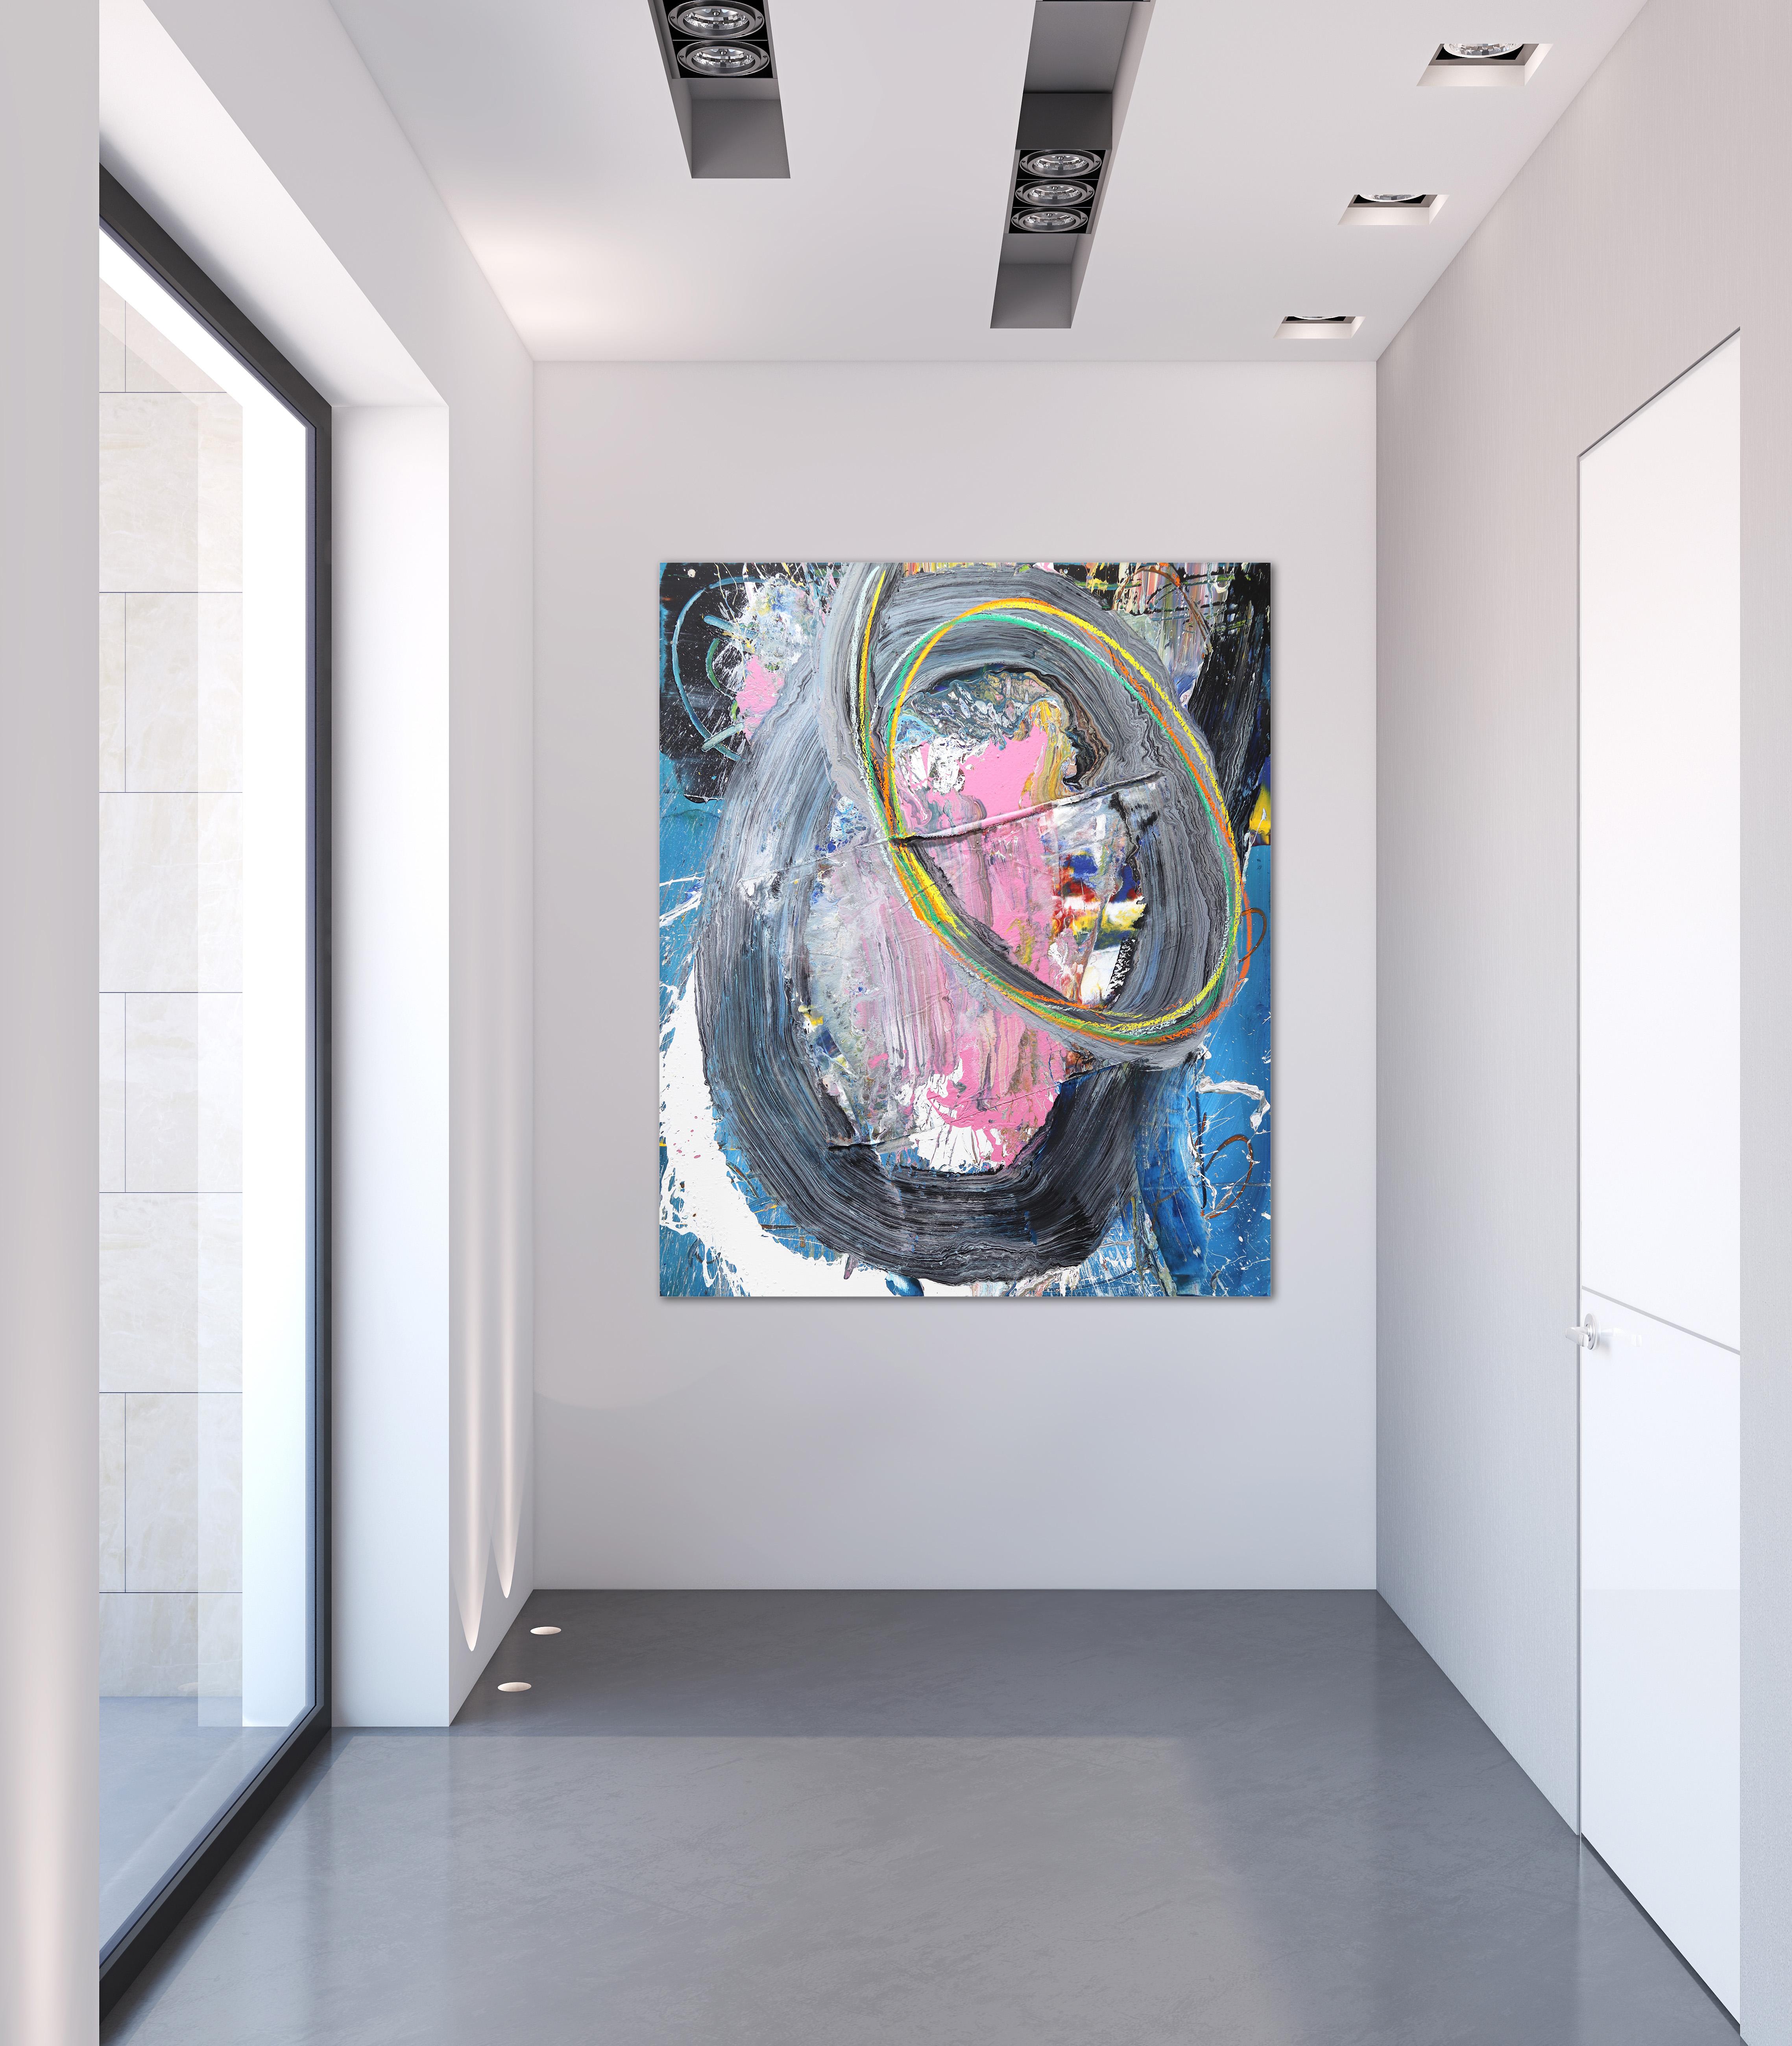 This large textural abstract energetic artwork on canvas by Togolese artist Olympio is a unique mixed media painting with a raw and direct aesthetic, providing an unfiltered manifestation of the artist's soul. Its expressive brushstrokes and vibrant